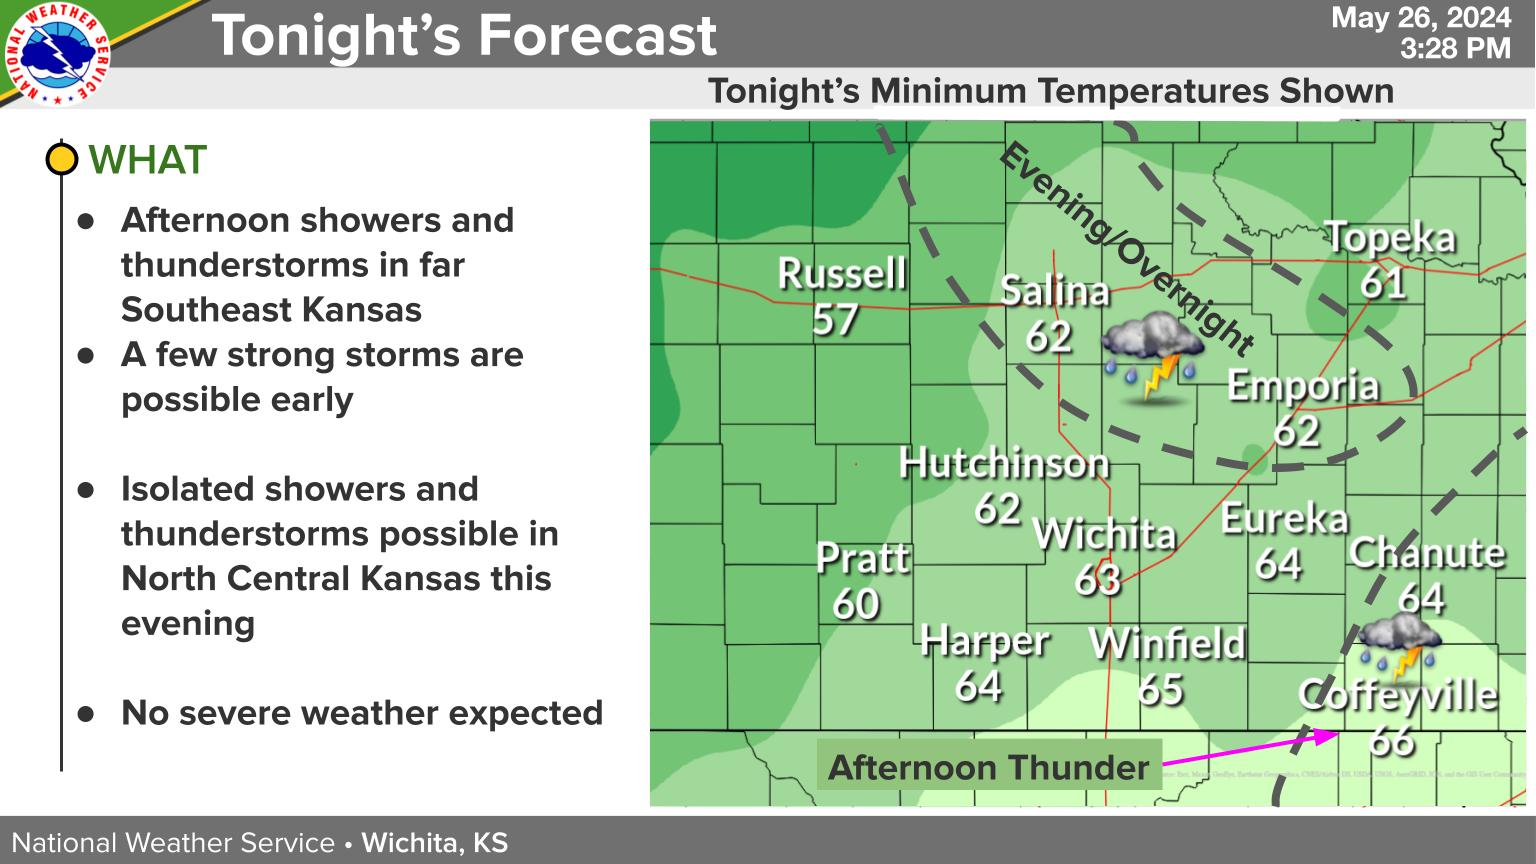 Mild Temperatures and Storm Forecasted for Midweek